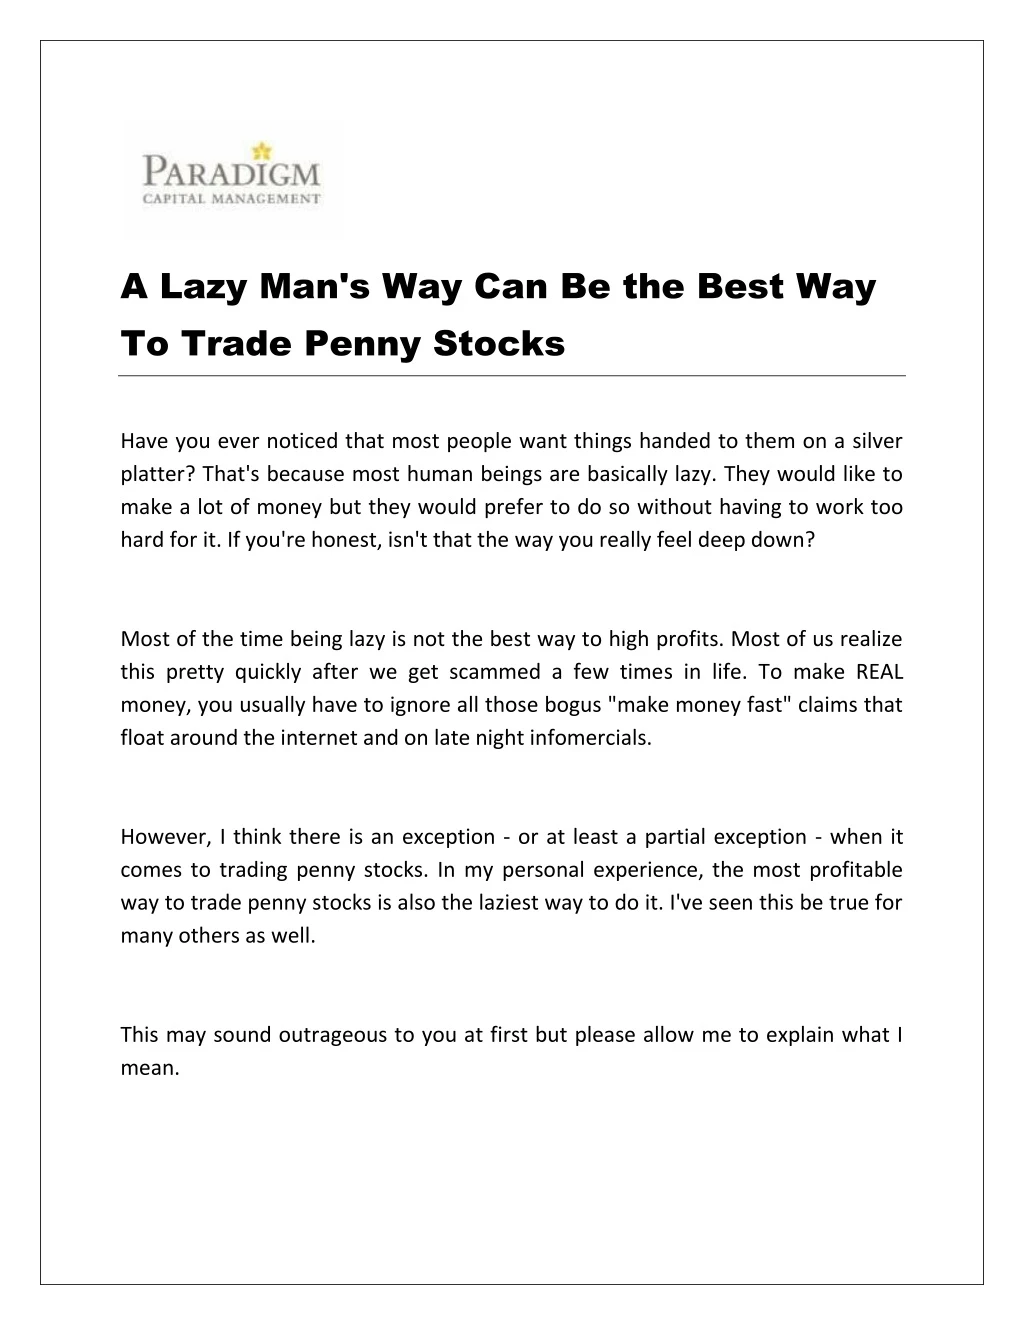 a lazy man s way can be the best way to trade